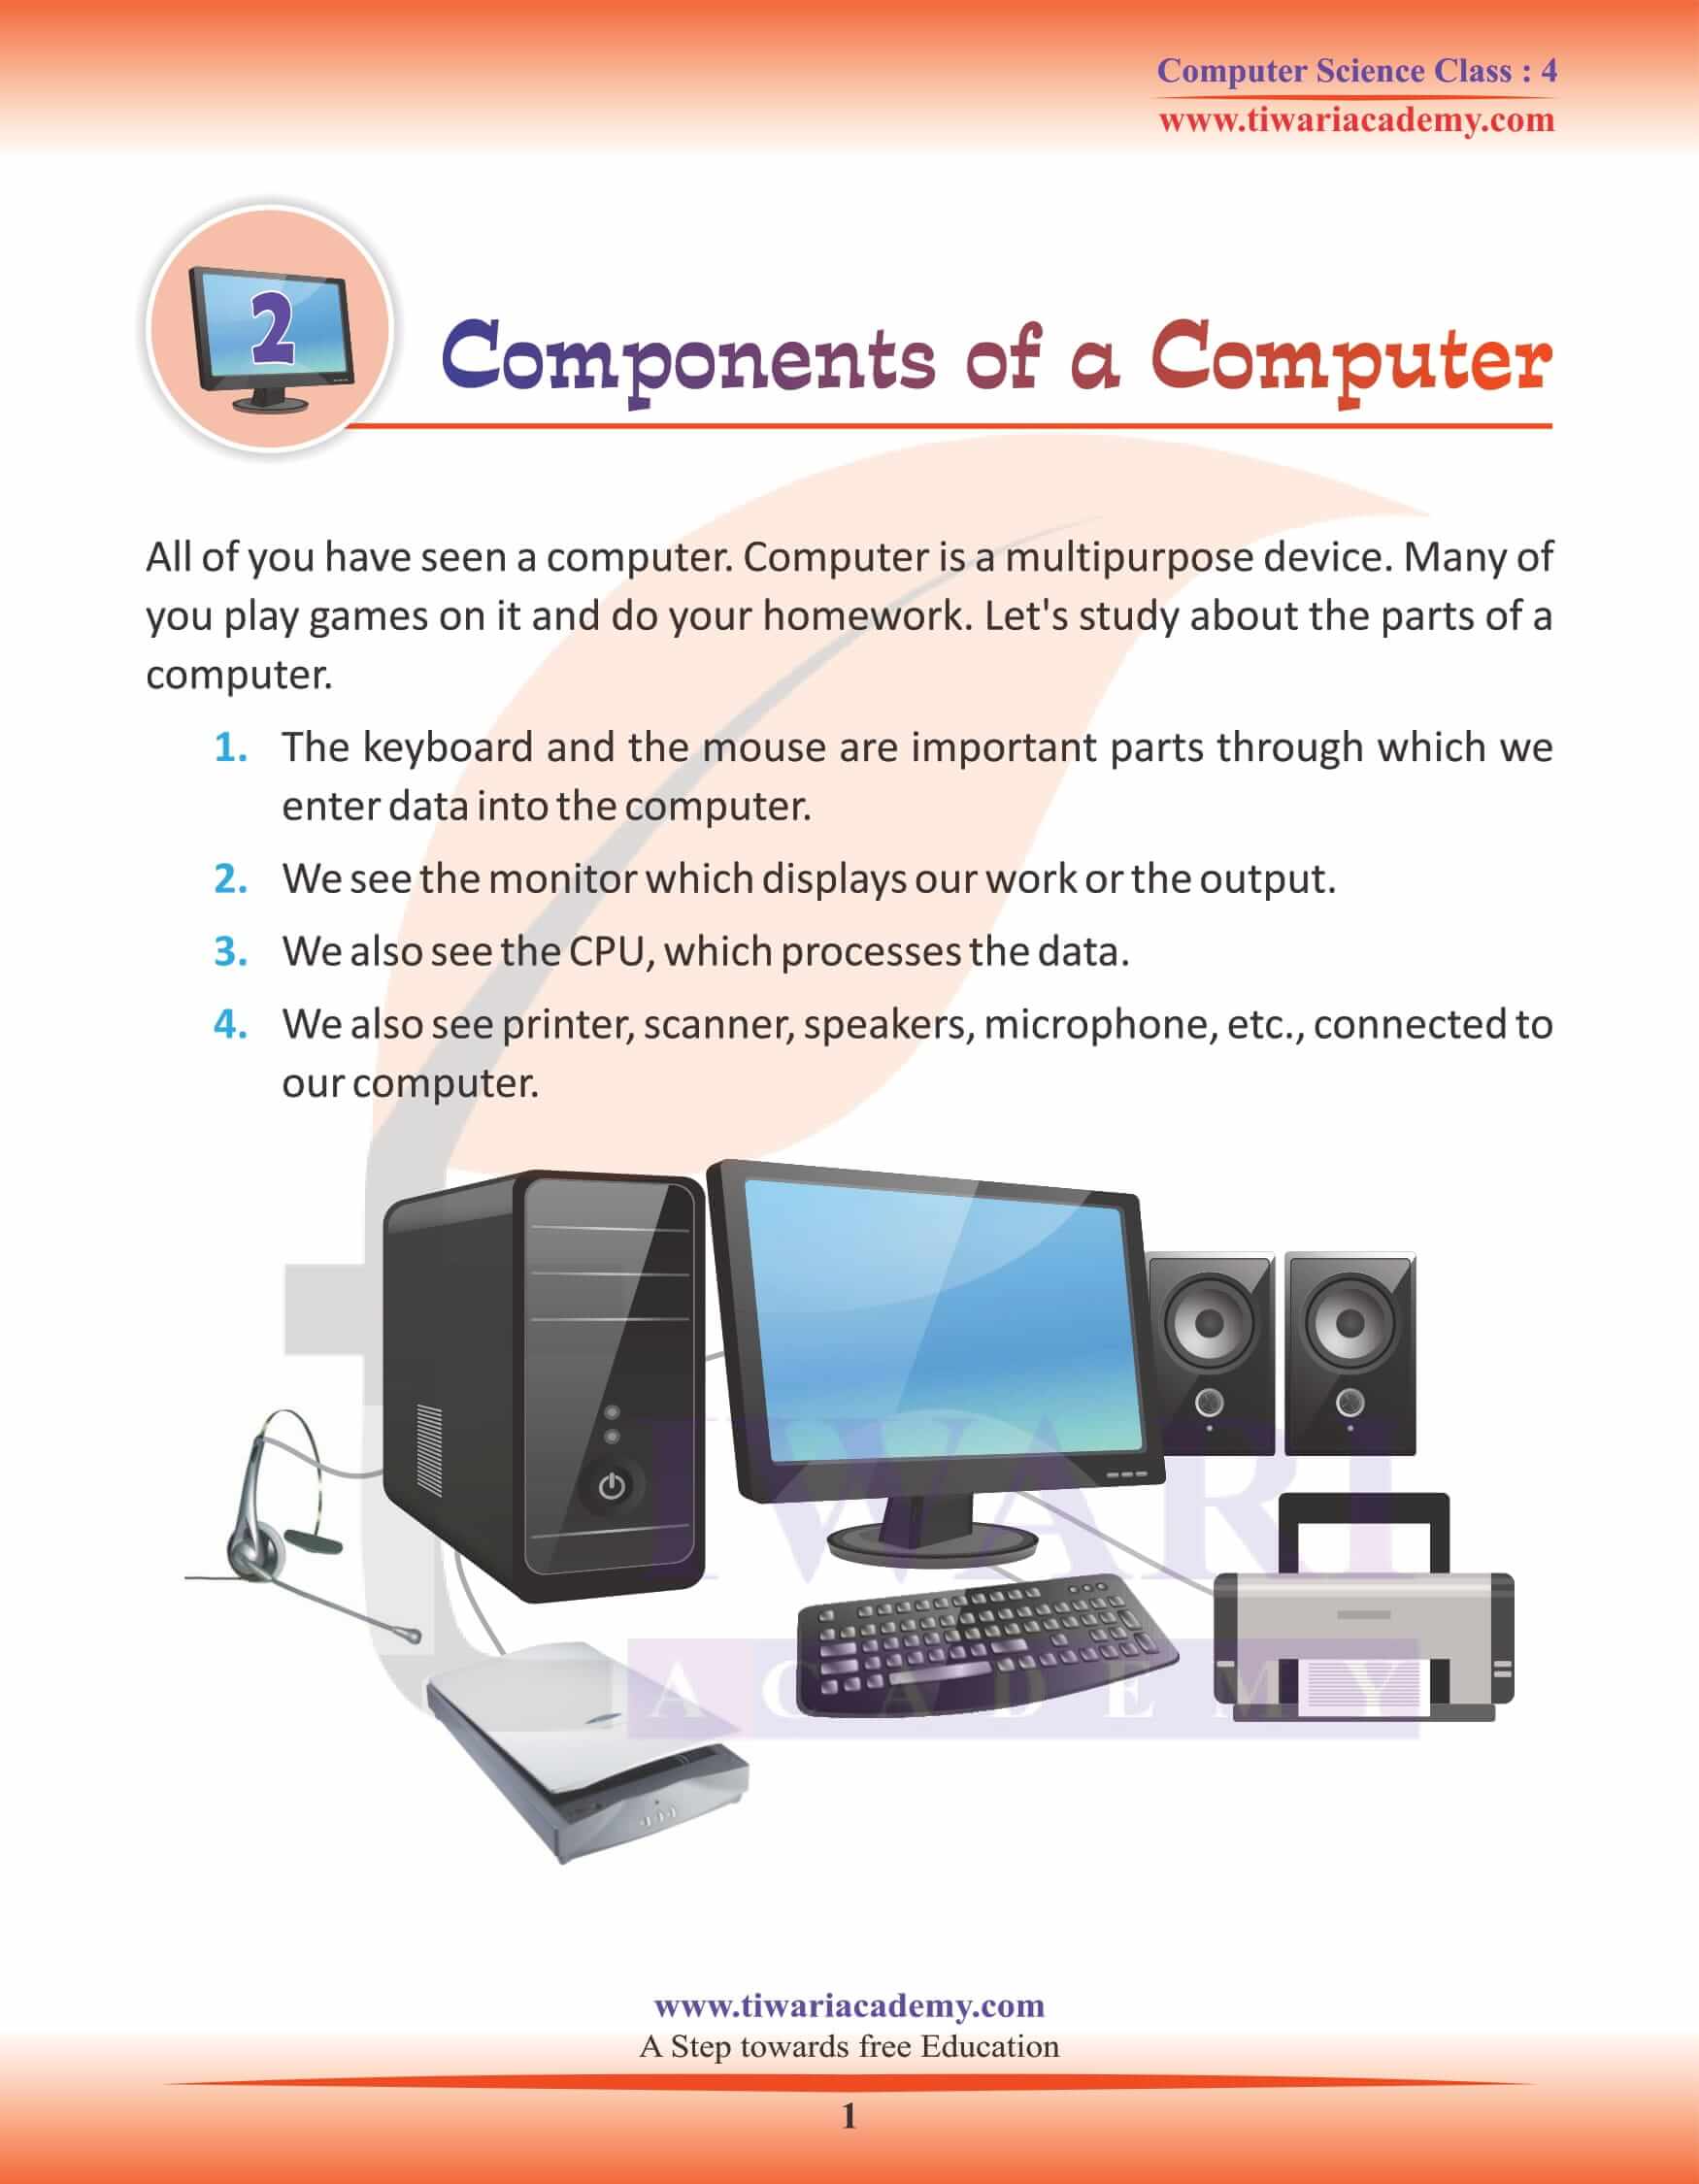 Class 4 Computer Science Chapter 2 Components of a Computer